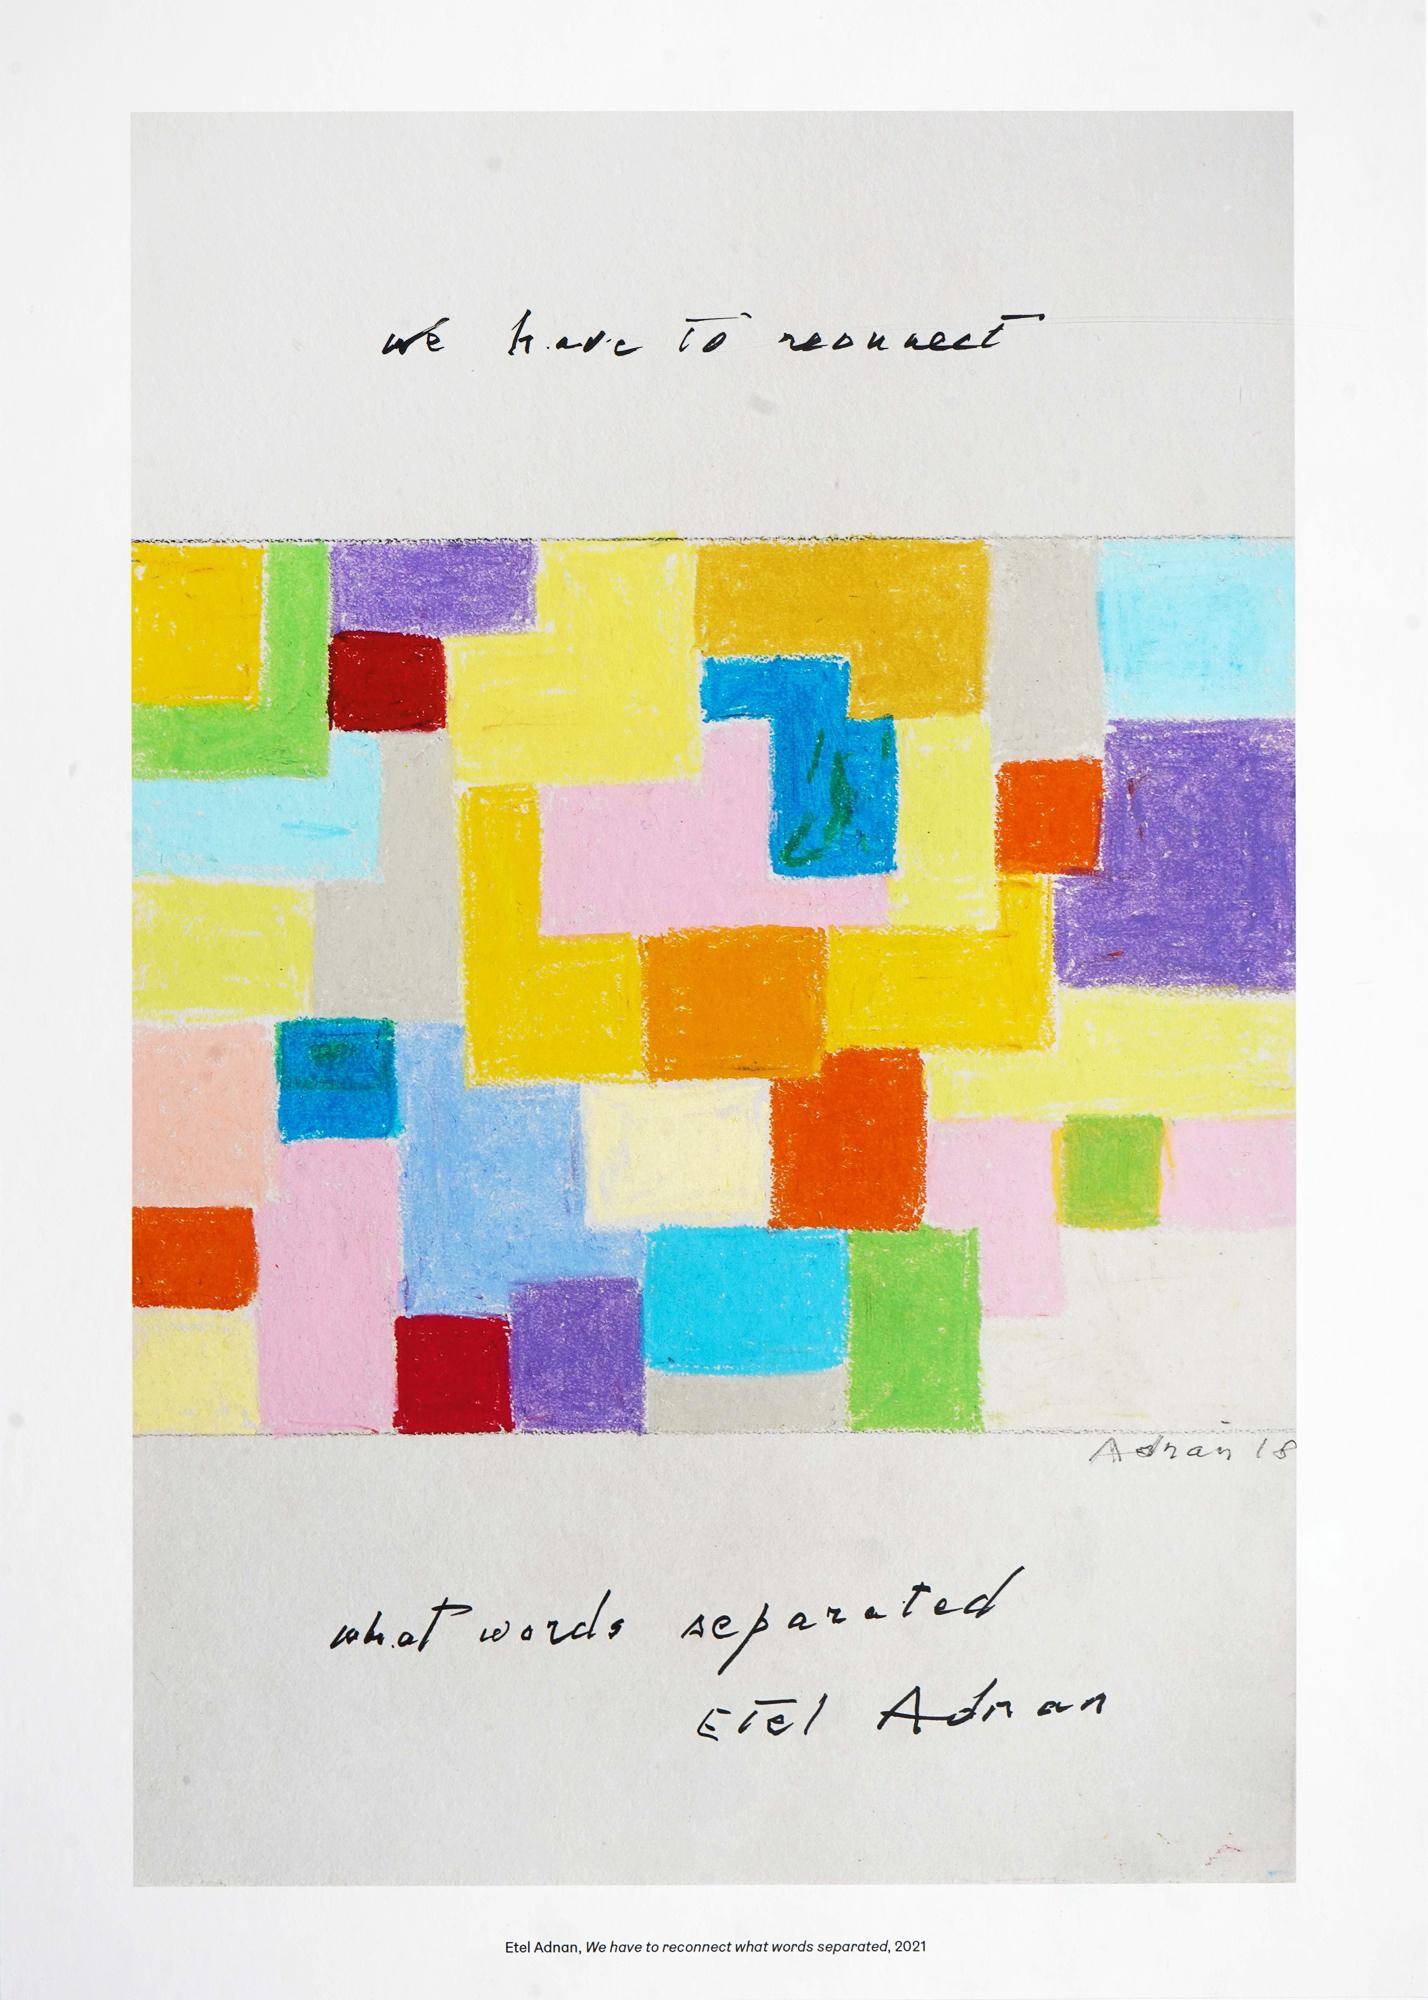 Etel Adnan Abstract Print - We have to reconnect what words separated